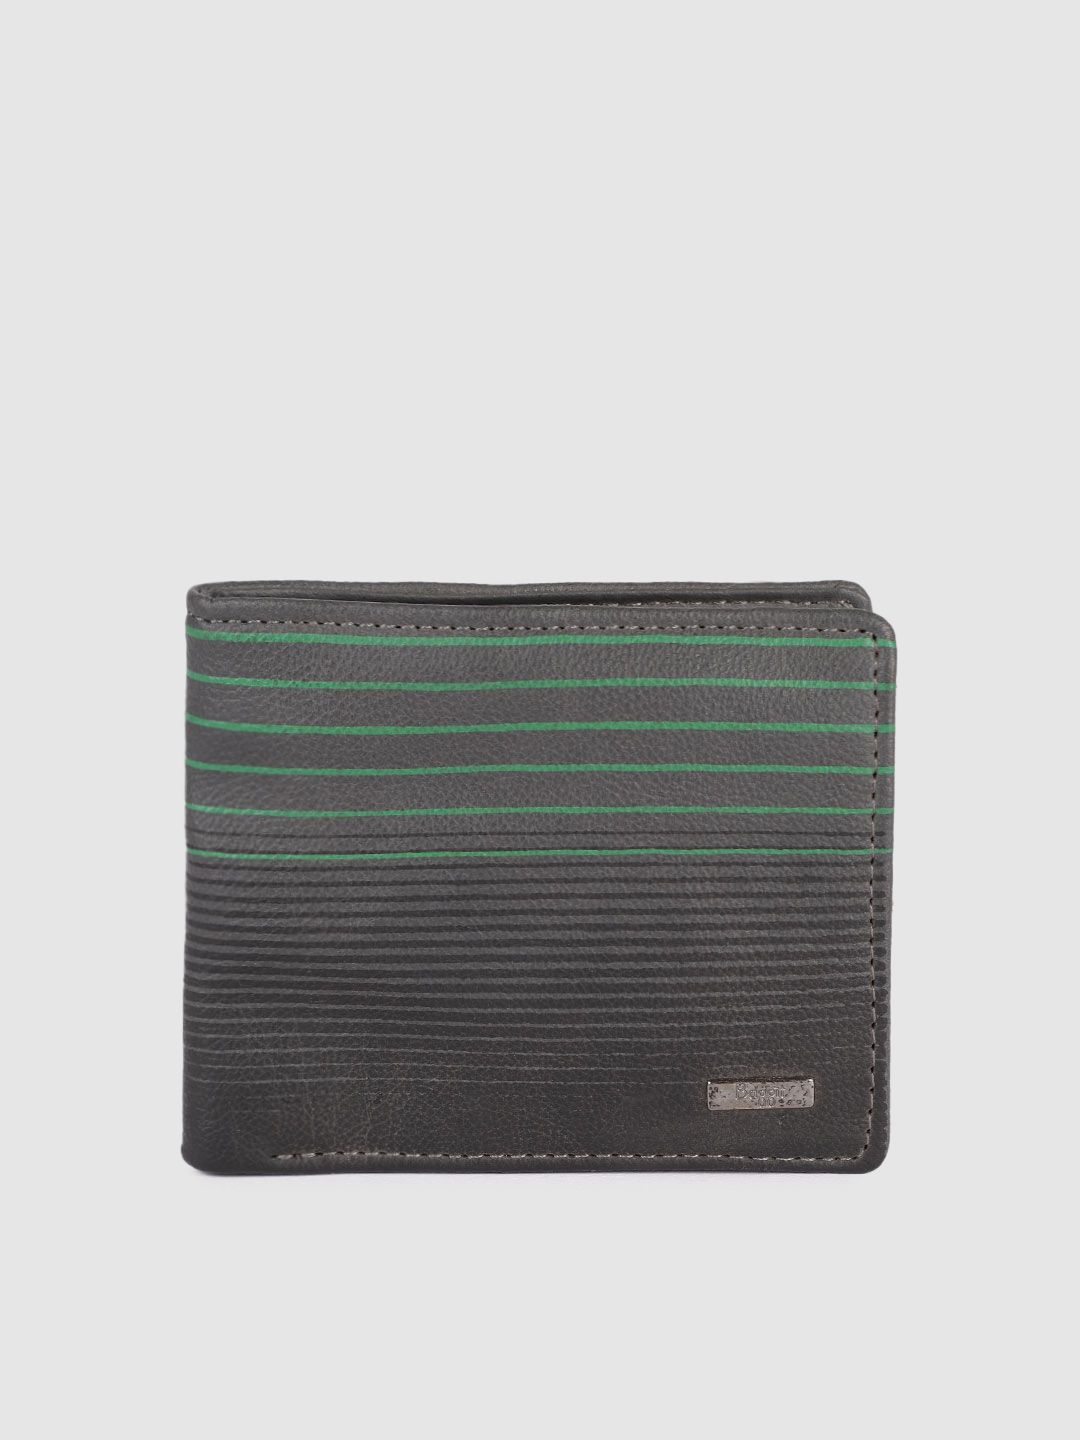 Baggit Women Blue Striped Two Fold Wallet Price in India